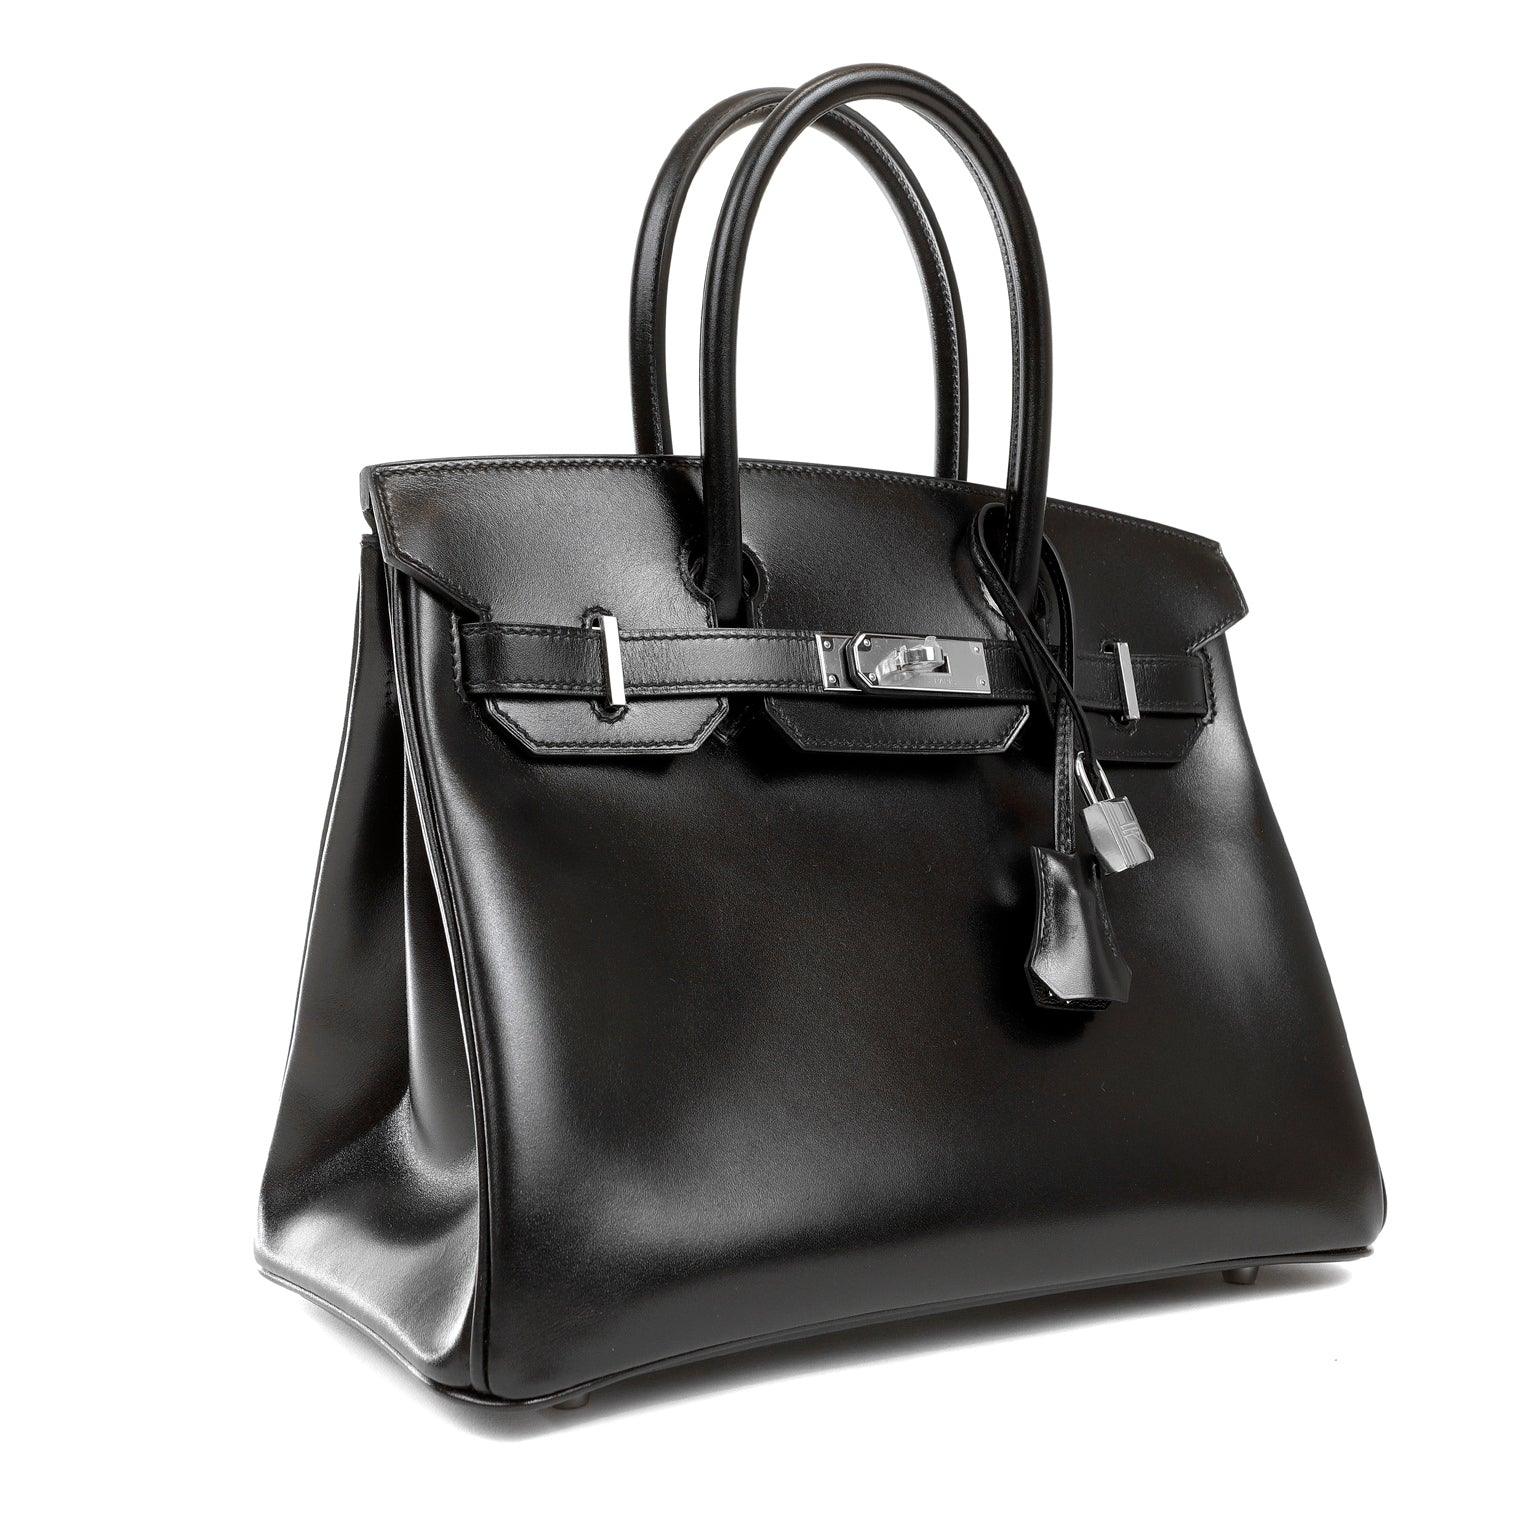 Sold at Auction: HERMES SO BLACK BIRKIN 30 IN BOX CALF LEATHER